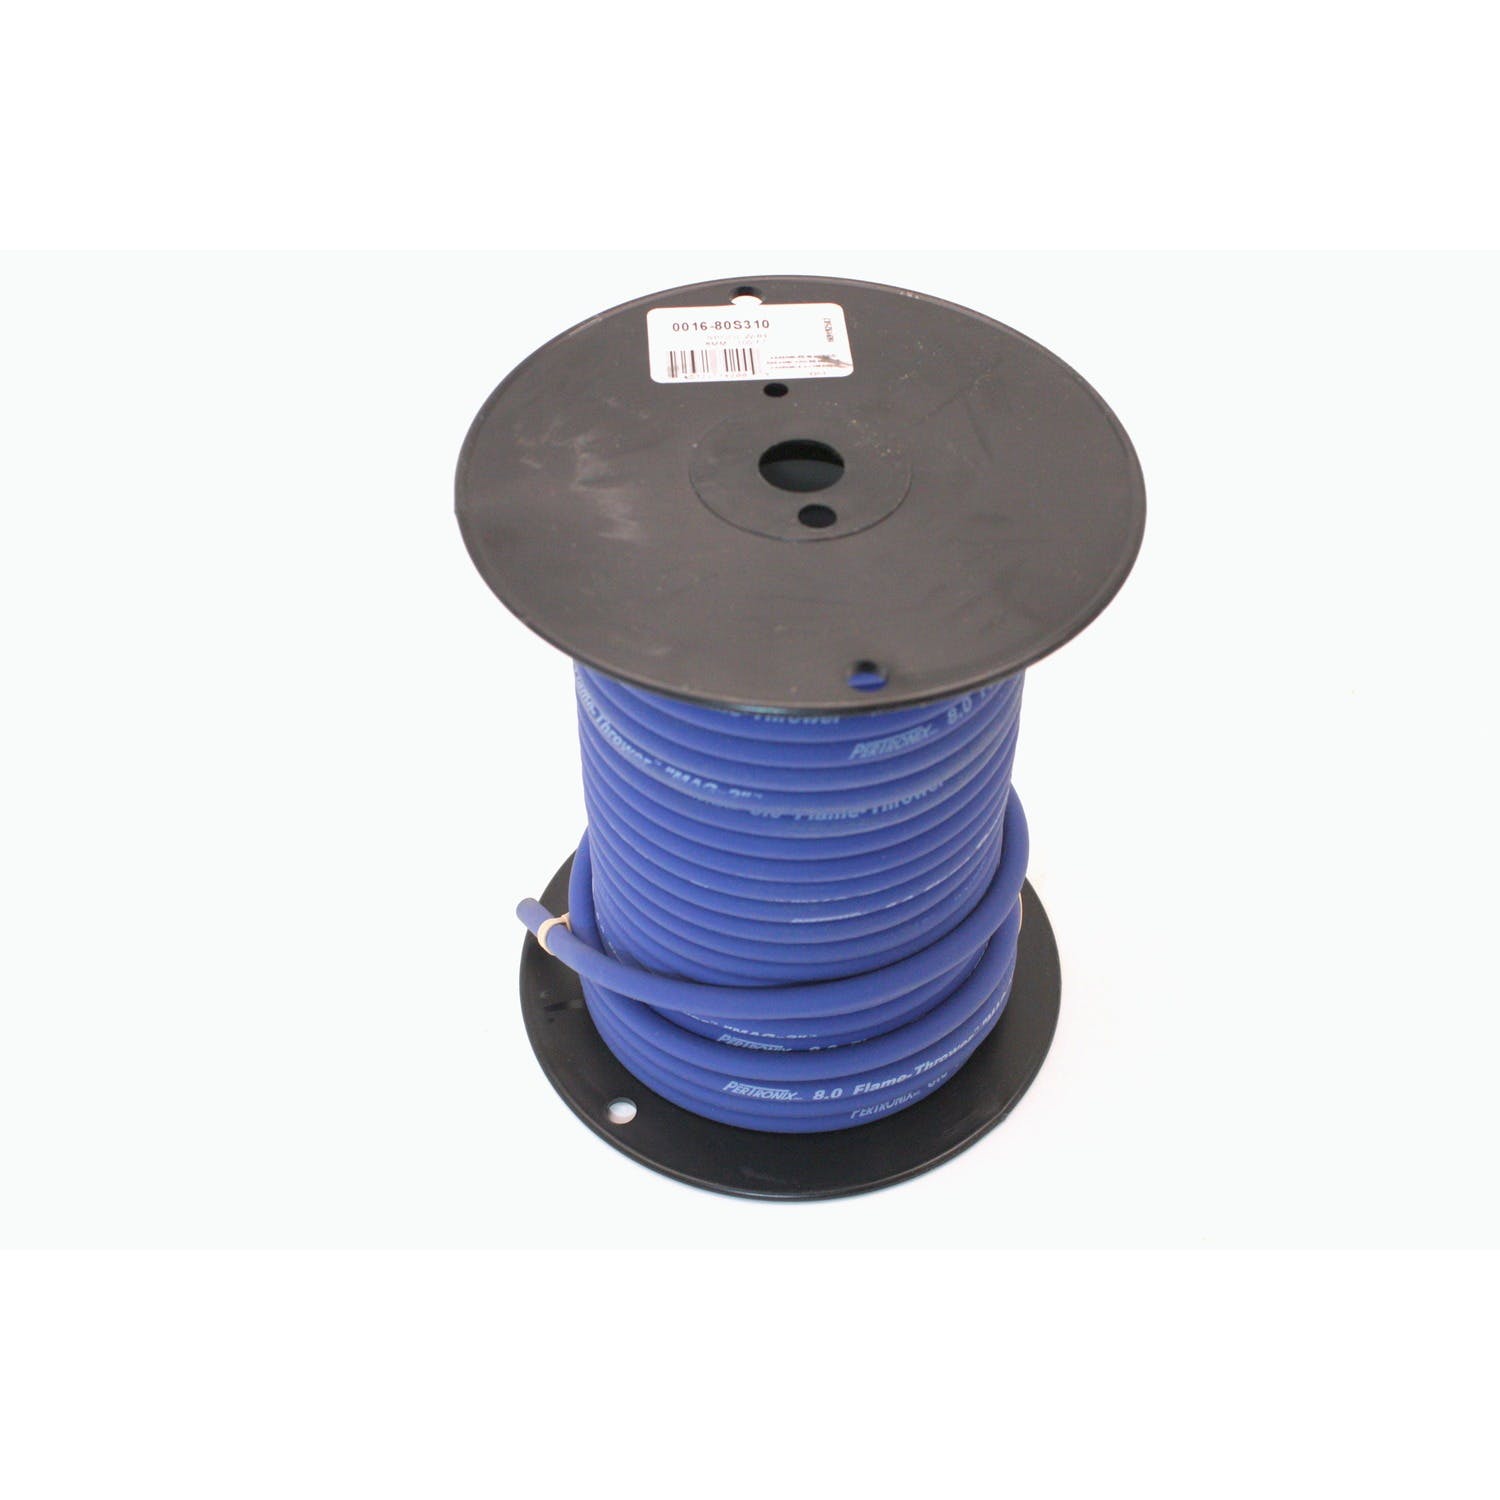 PerTronix 80S310 Wires, 8MM blue, white script - 100Ft spool